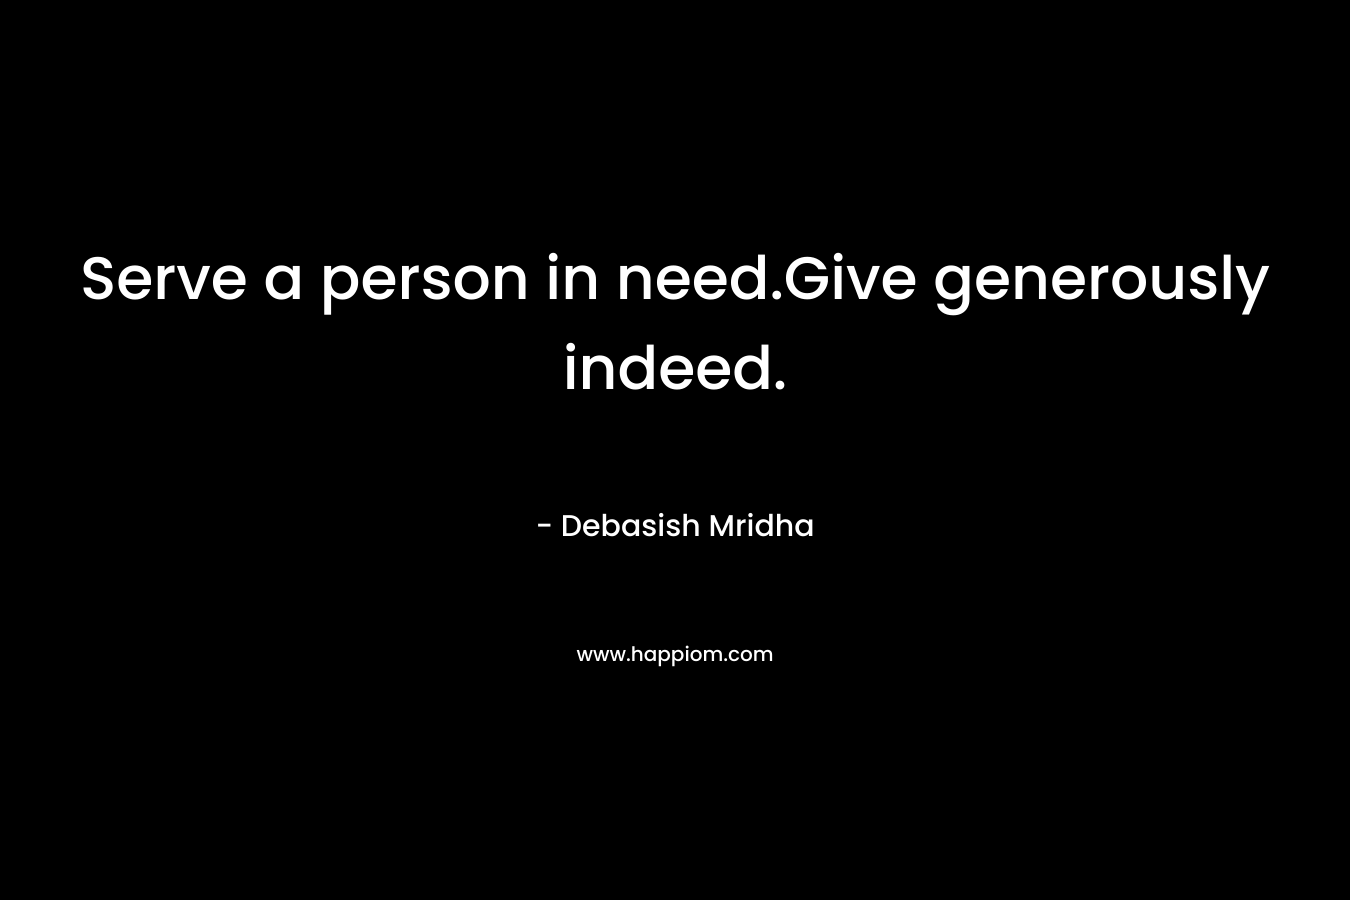 Serve a person in need.Give generously indeed.